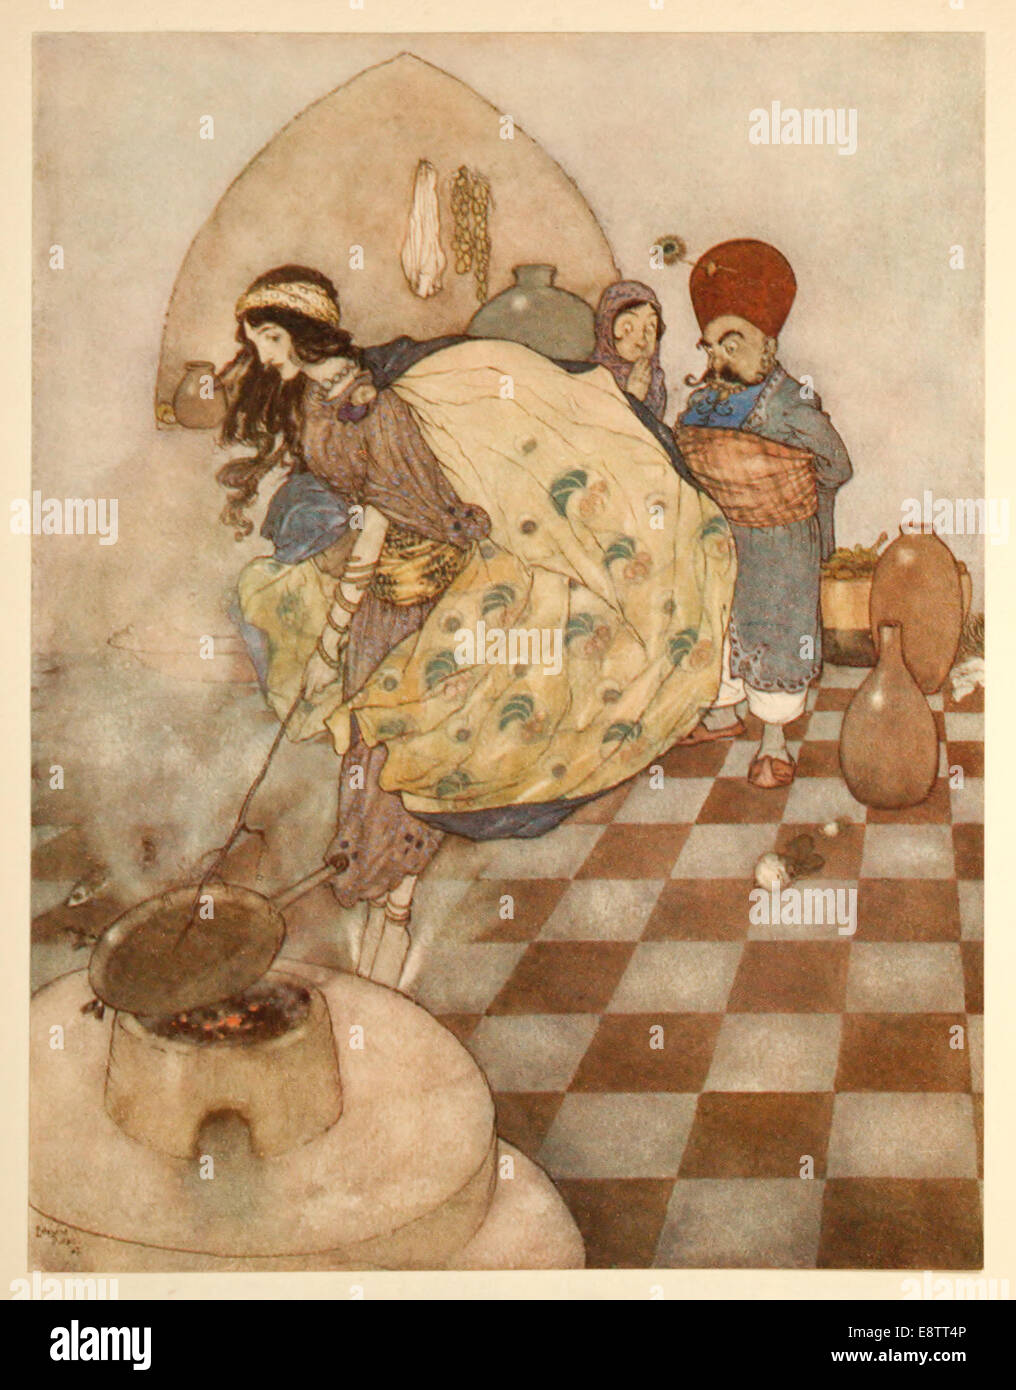 Fisherman & the Genie - Edmund Dulac illustration from ‘Stories from the Arabian nights’. See description for more information Stock Photo